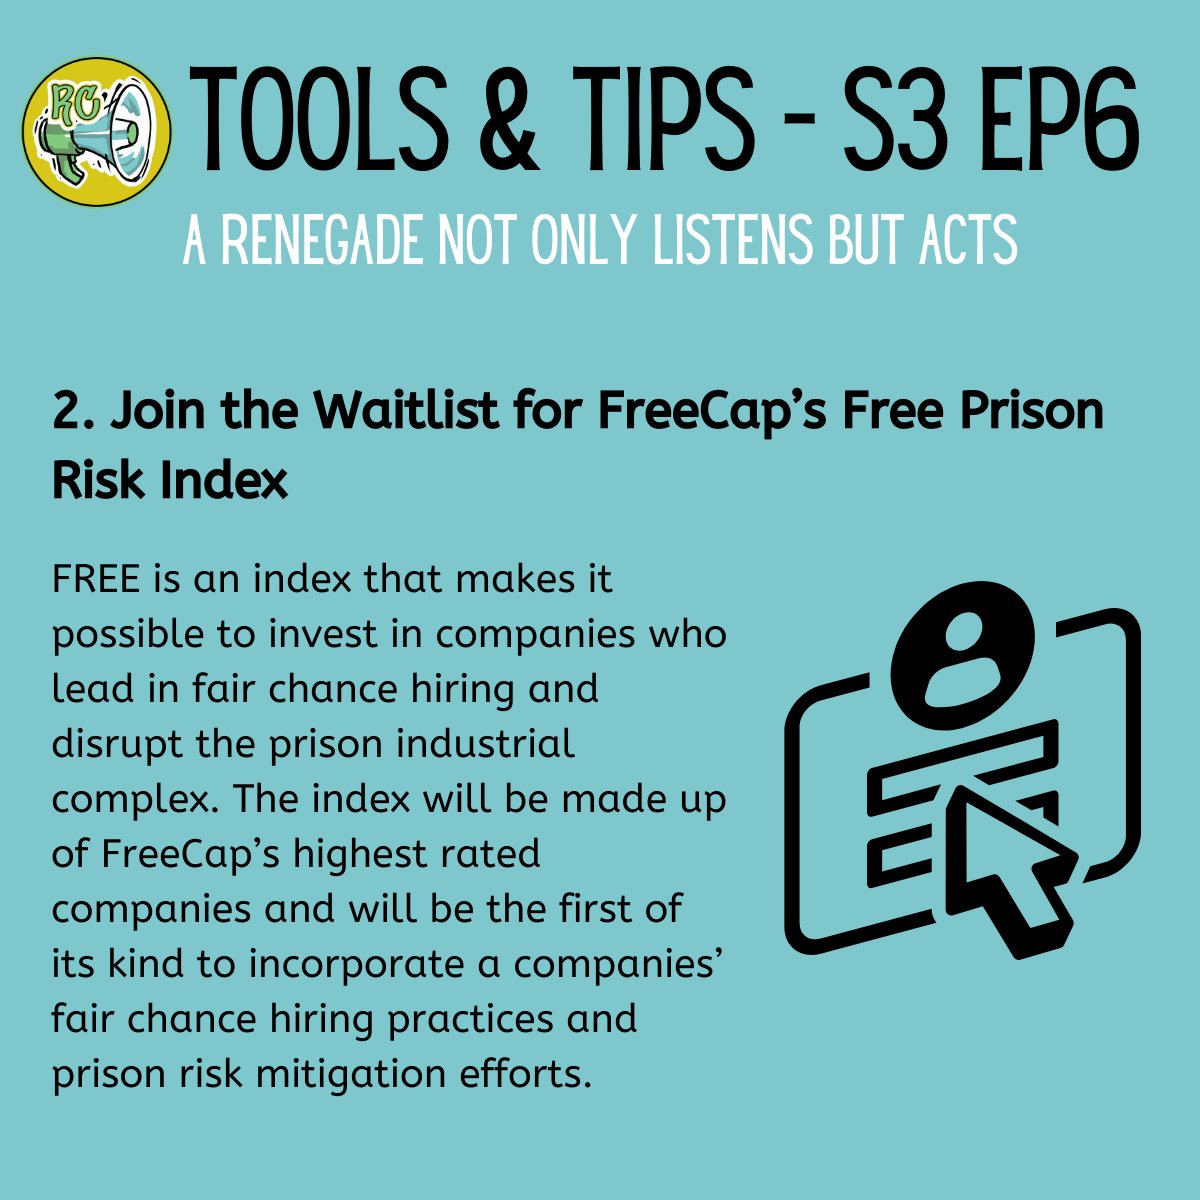 A renegade not only listens but acts! ⛓️ Check if your investments are incarceration-free. ow.ly/4AAZ50QiynG 💰 Join the waitlist for FreeCap’s Free Prison Risk Index. ow.ly/meAE50QiynH And be sure to check out Episode 6: ow.ly/8Yua50QiynI #renegadecap